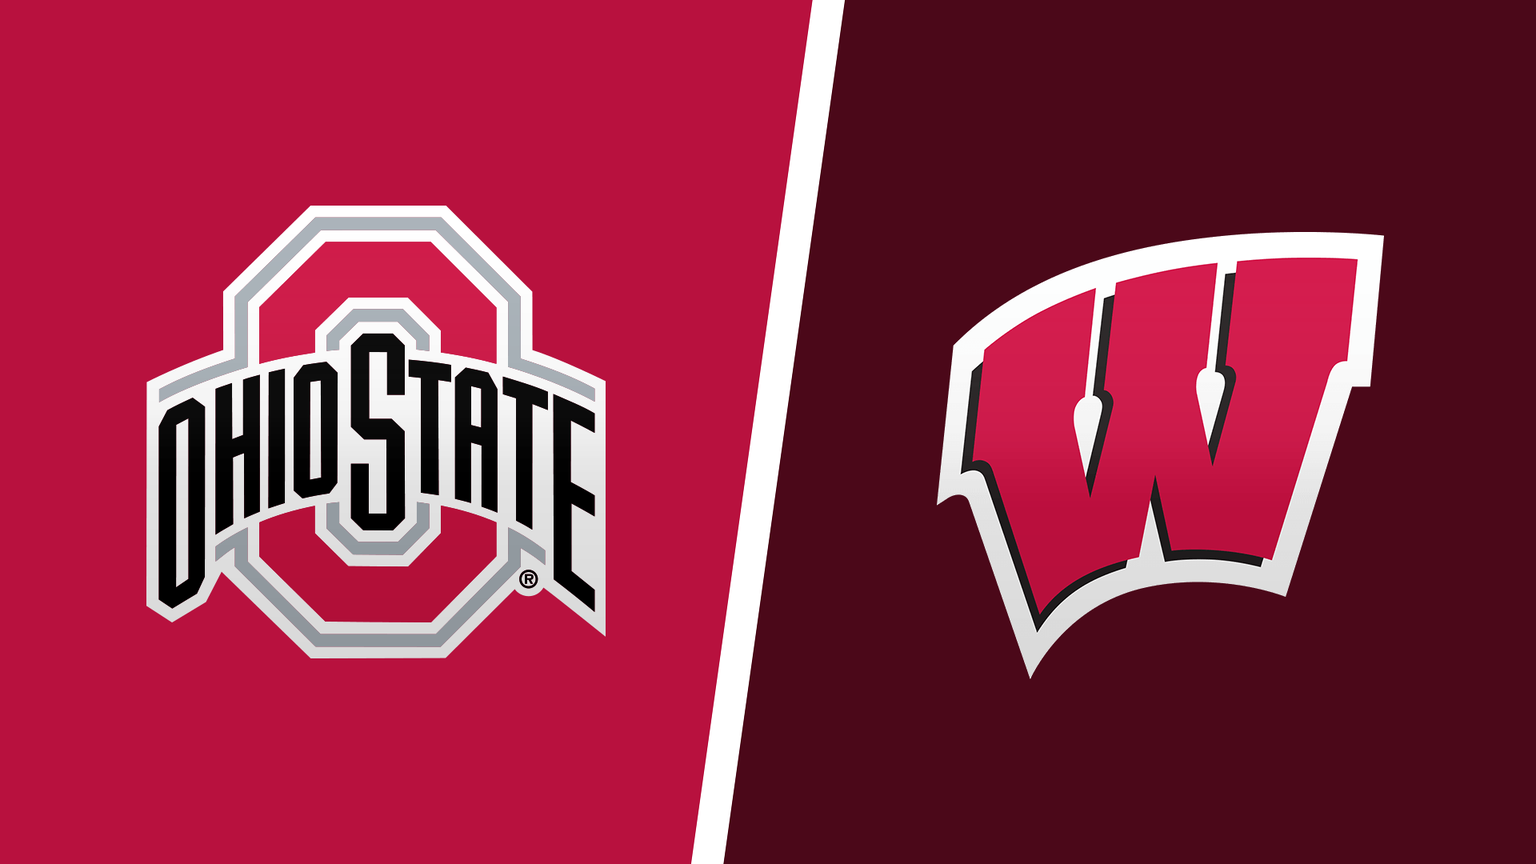 How to Watch Wisconsin vs. Ohio State Live Online on September 24, 2022